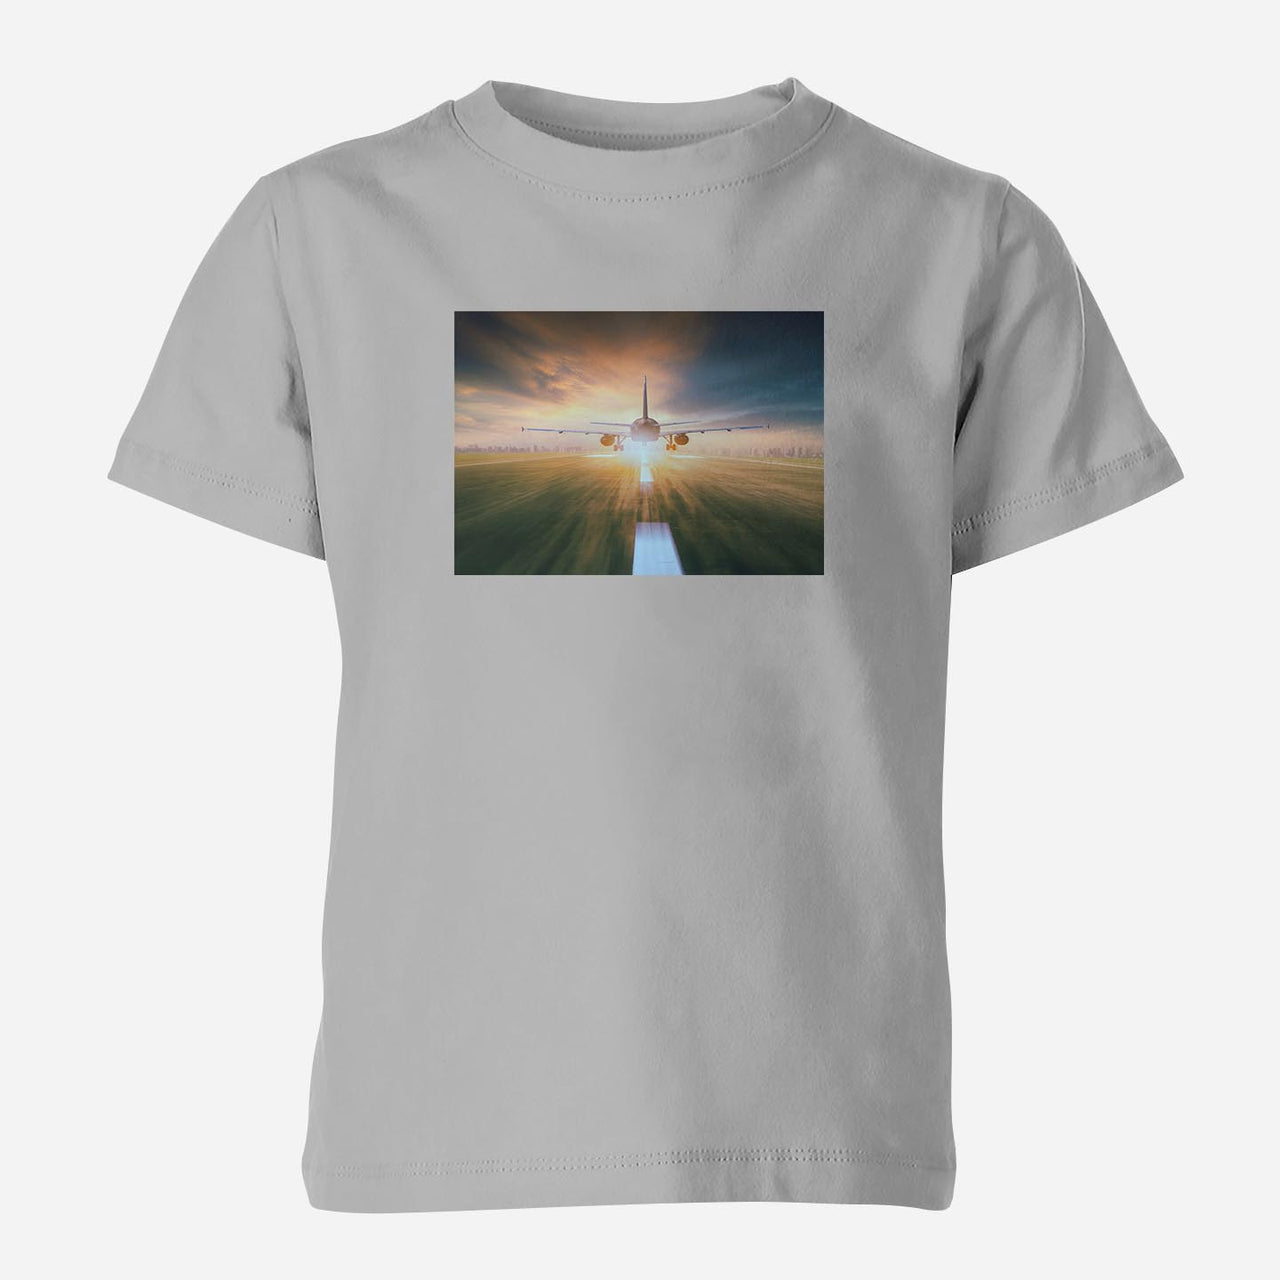 Airplane Flying Over Runway Designed Children T-Shirts